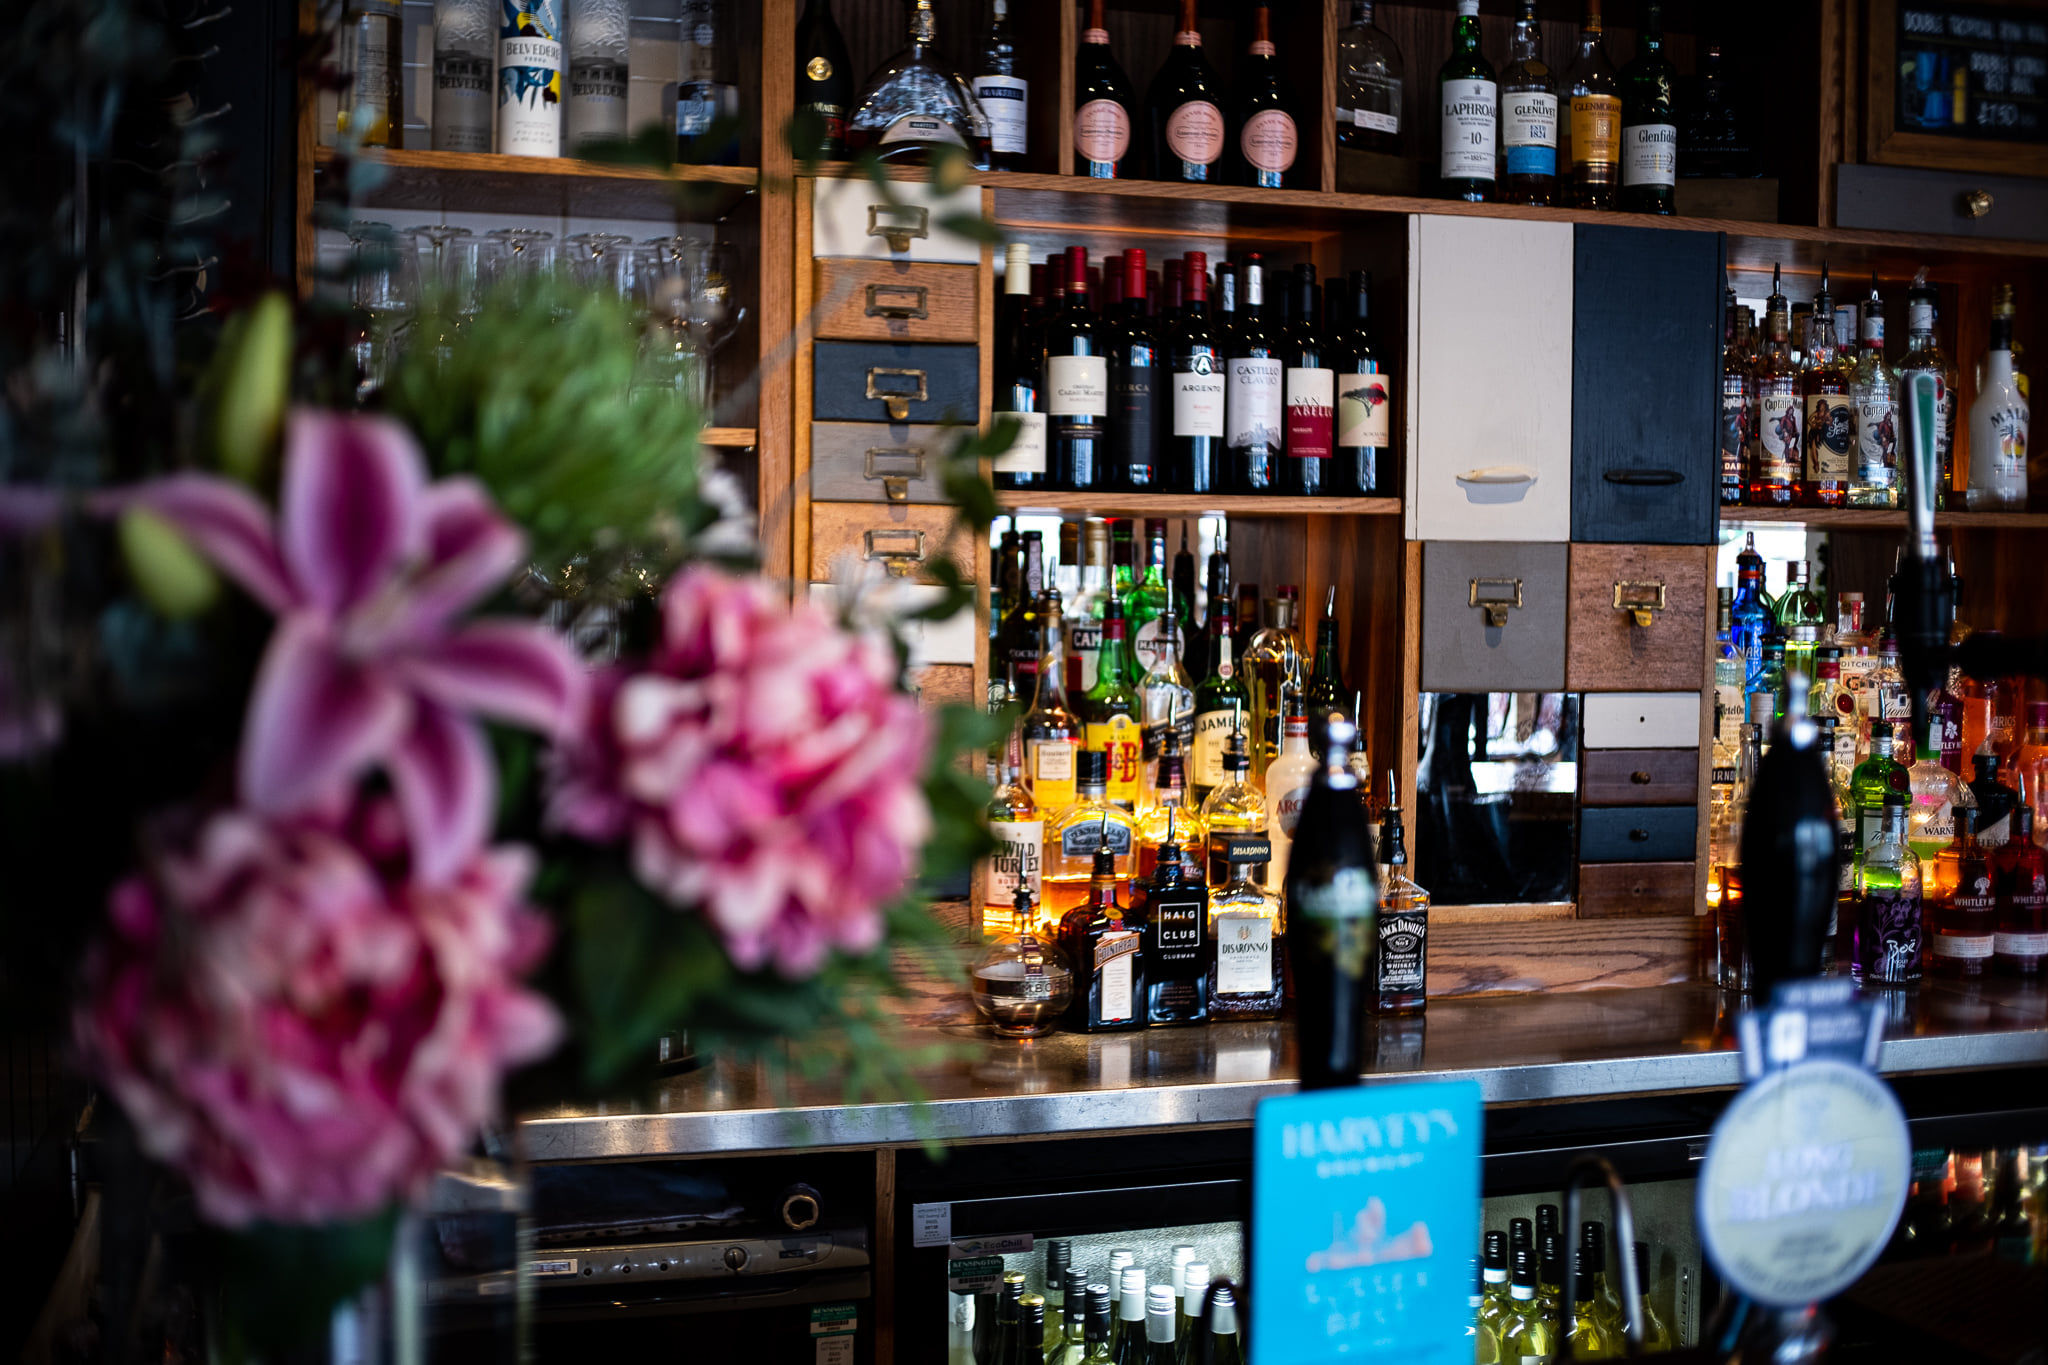 inside the libation bar in hove, lot of alcoholic drinks on the shelves